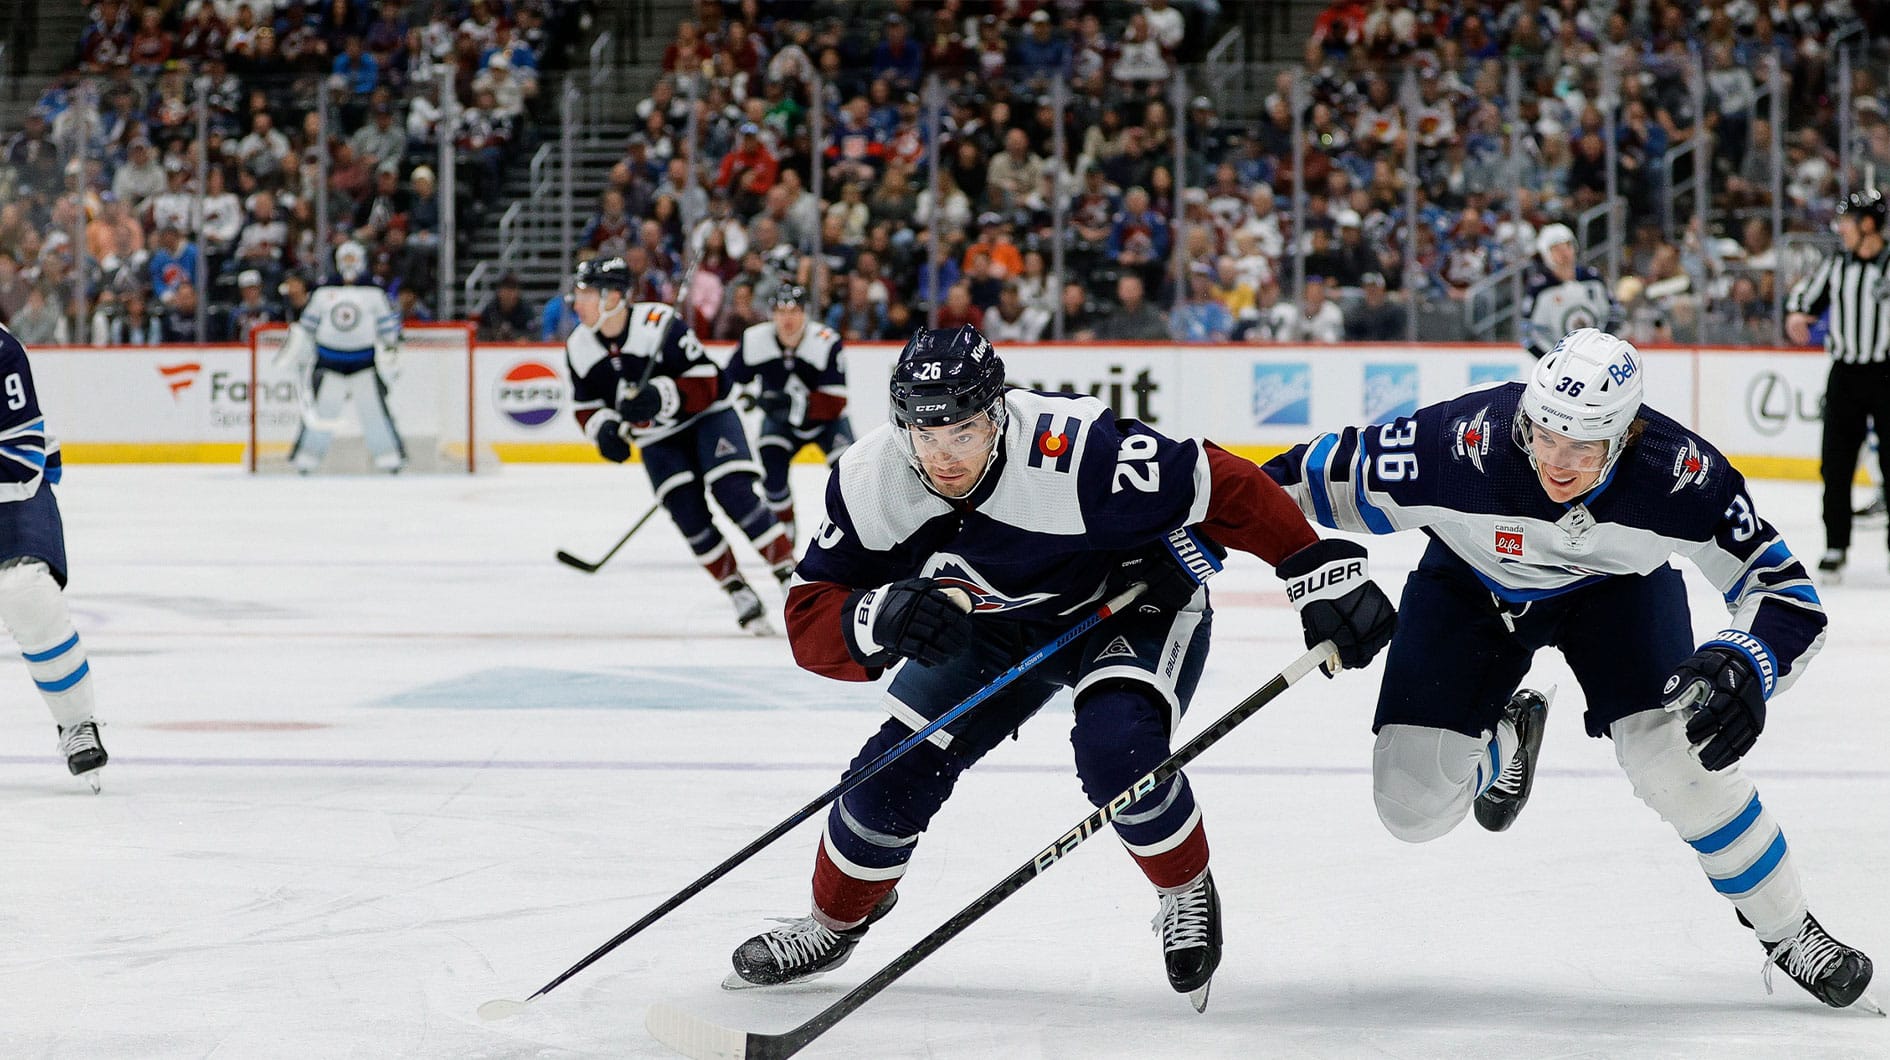 Colorado Avalanche defenseman Sean Walker (26) and Winnipeg Jets center Morgan Barron (36) chases down a loose puck in the first period at Ball Arena.